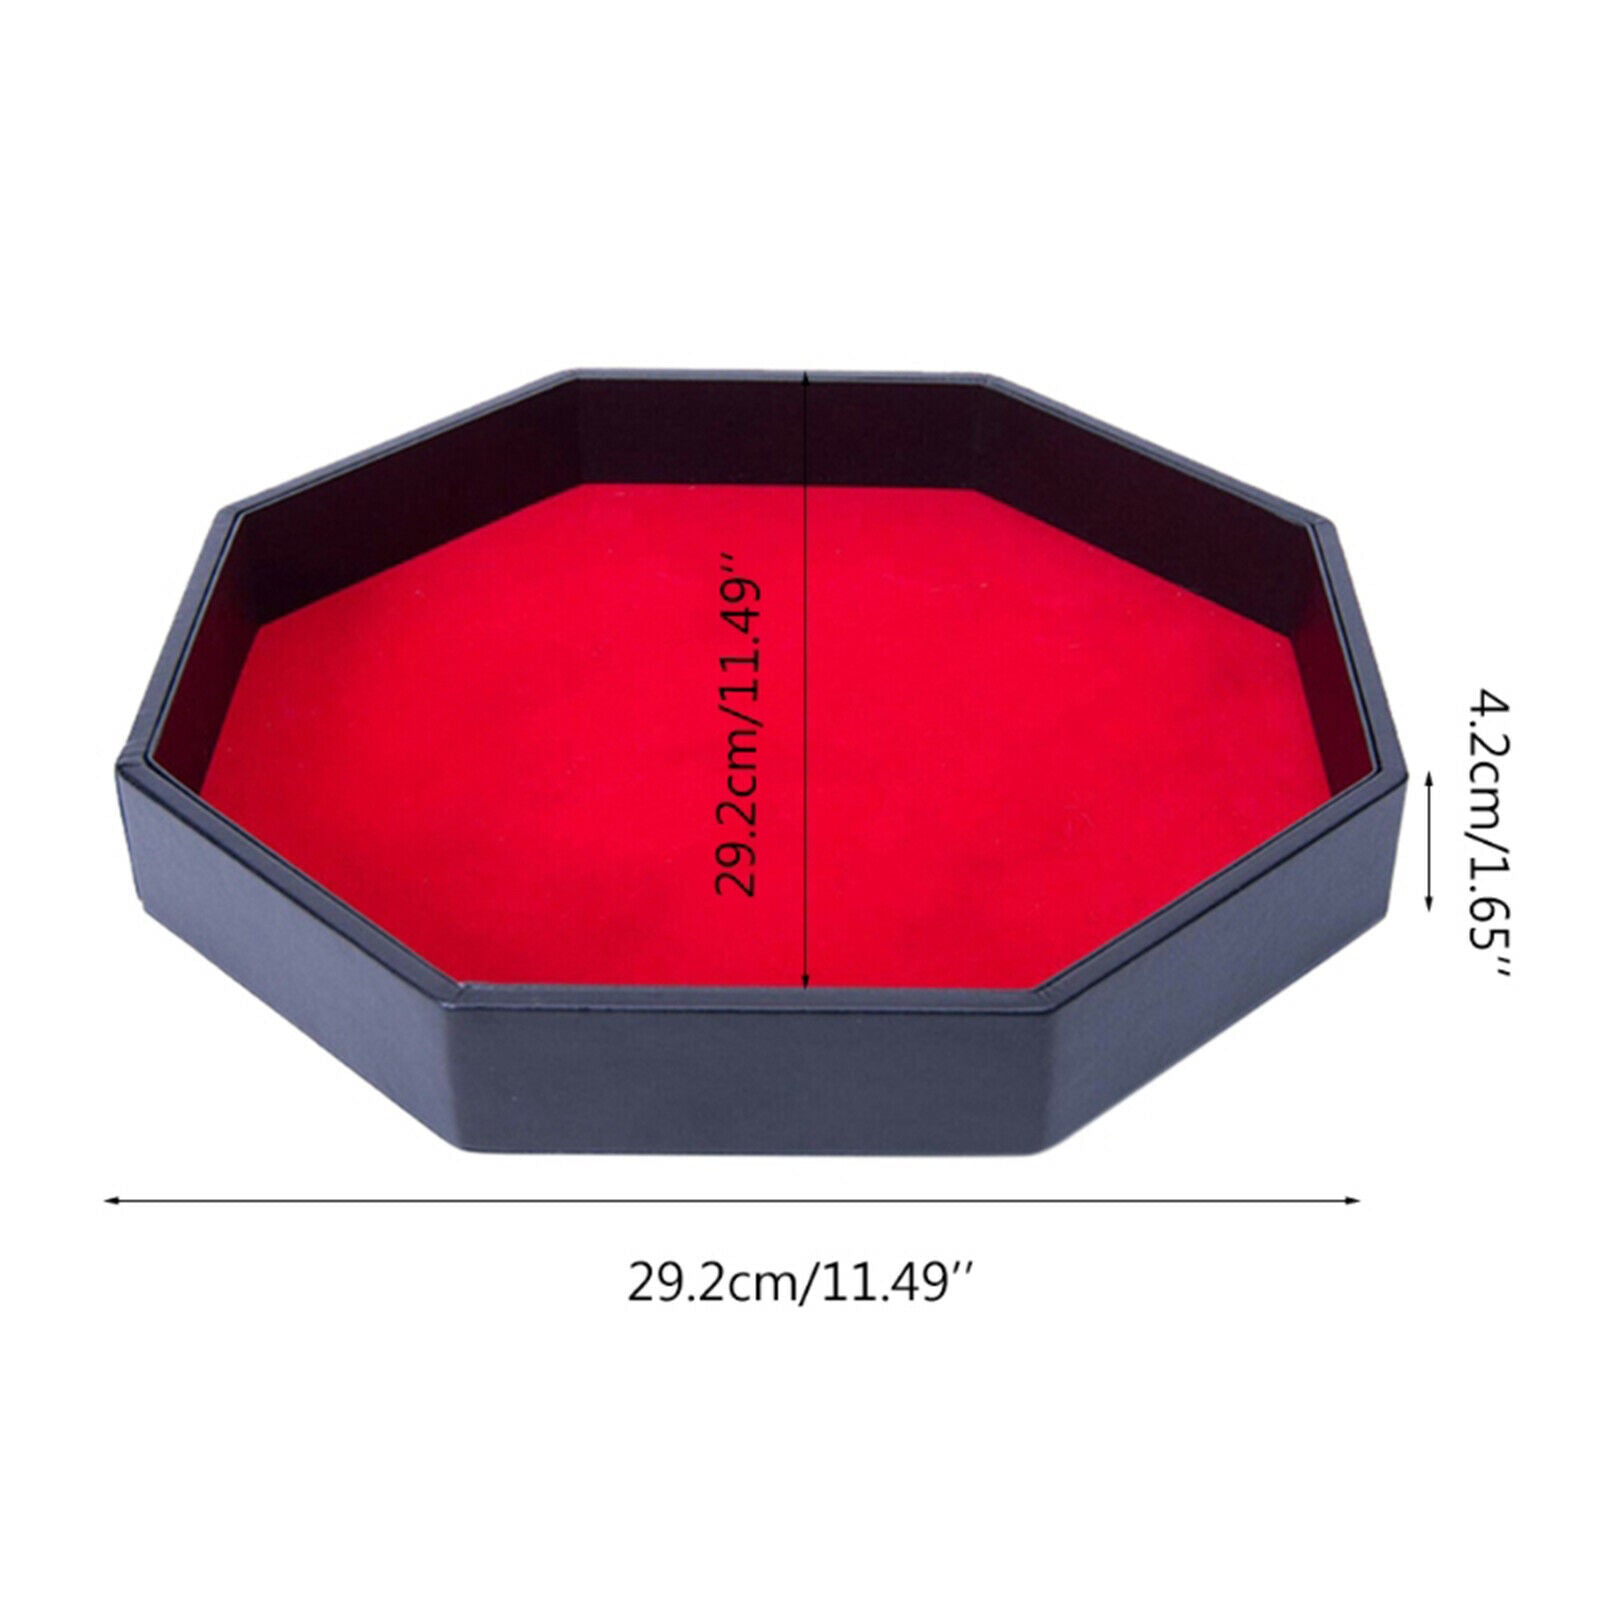 Portable Octagonal Dice Tray Red Velvet Table Games RPG and D&D Dice Game